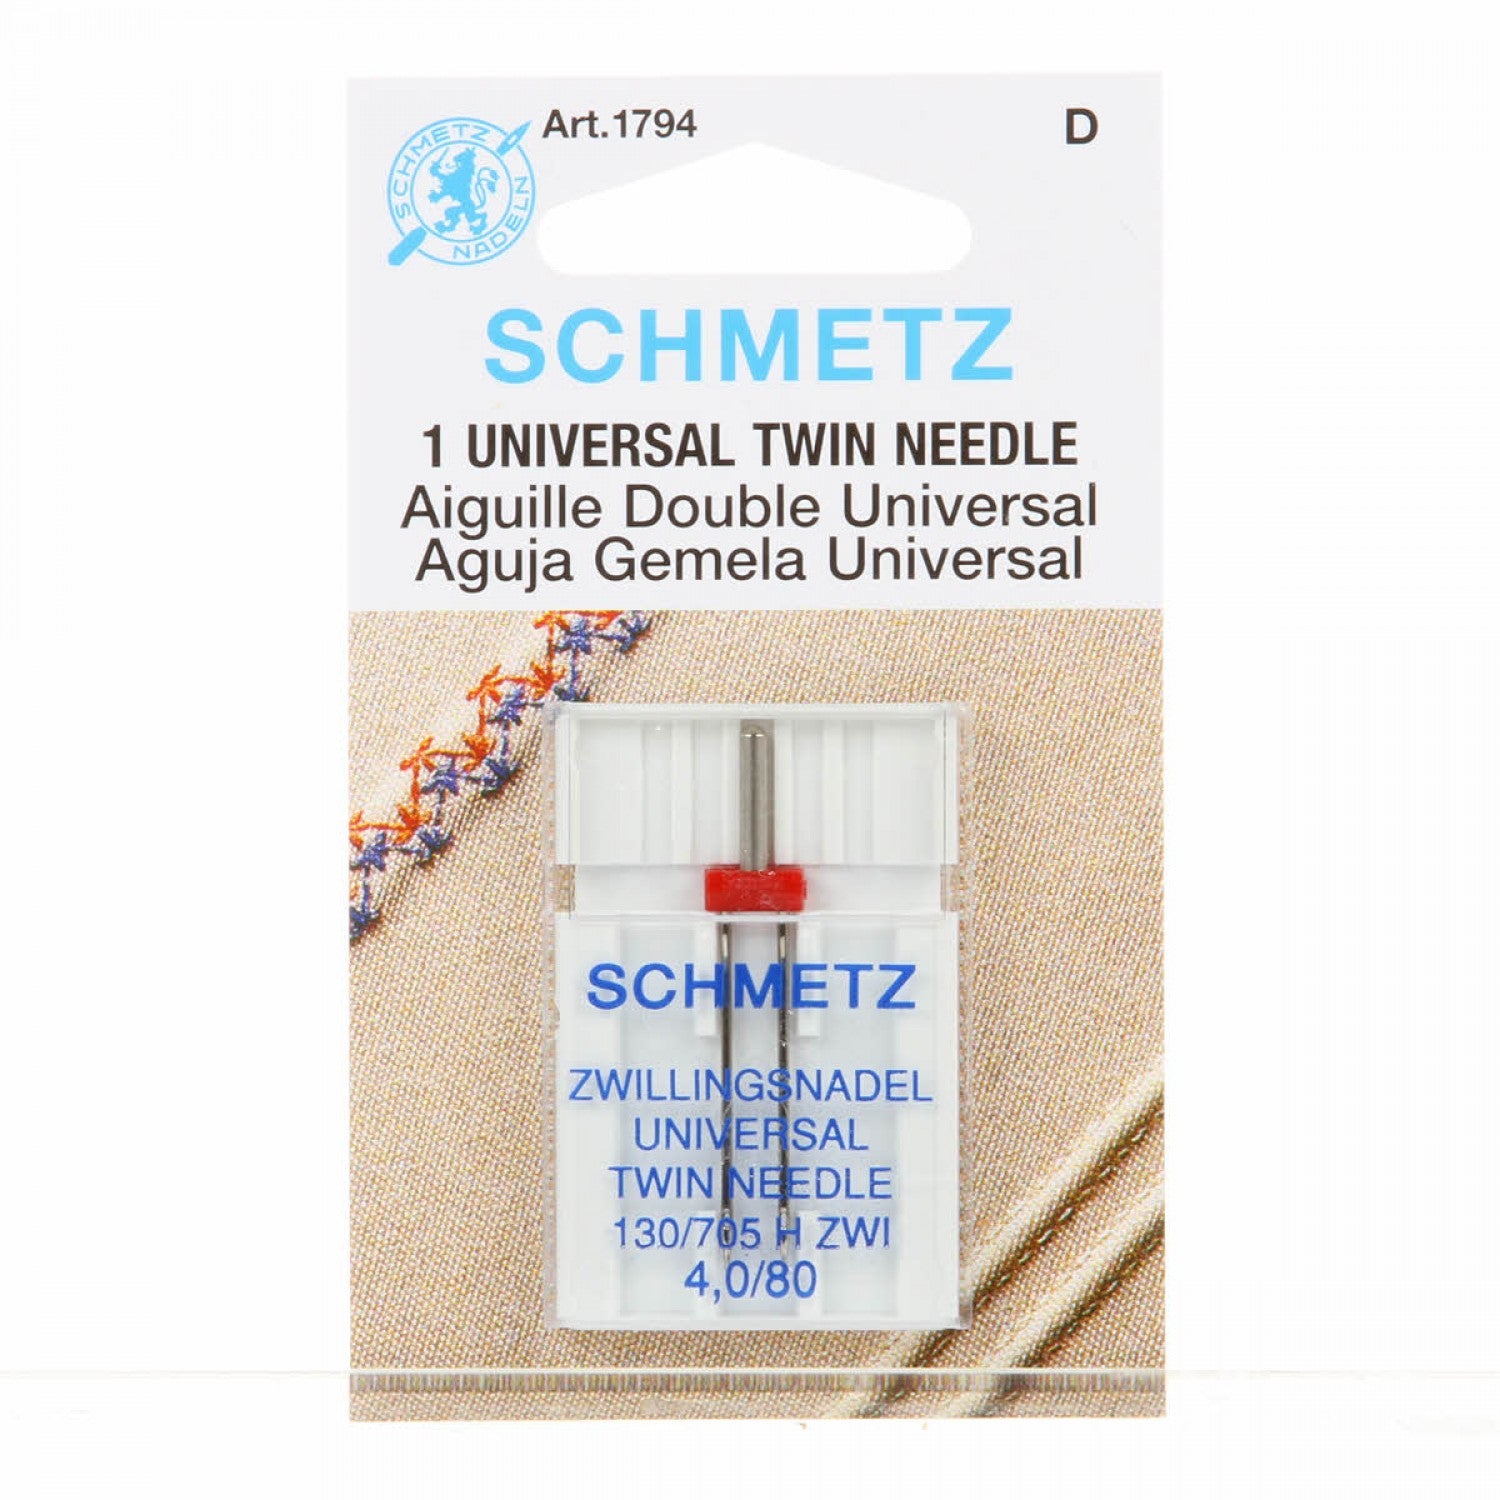 Schmetz Embroidery Needles - 75/11 and 90/14 1742 - The Batty Lady